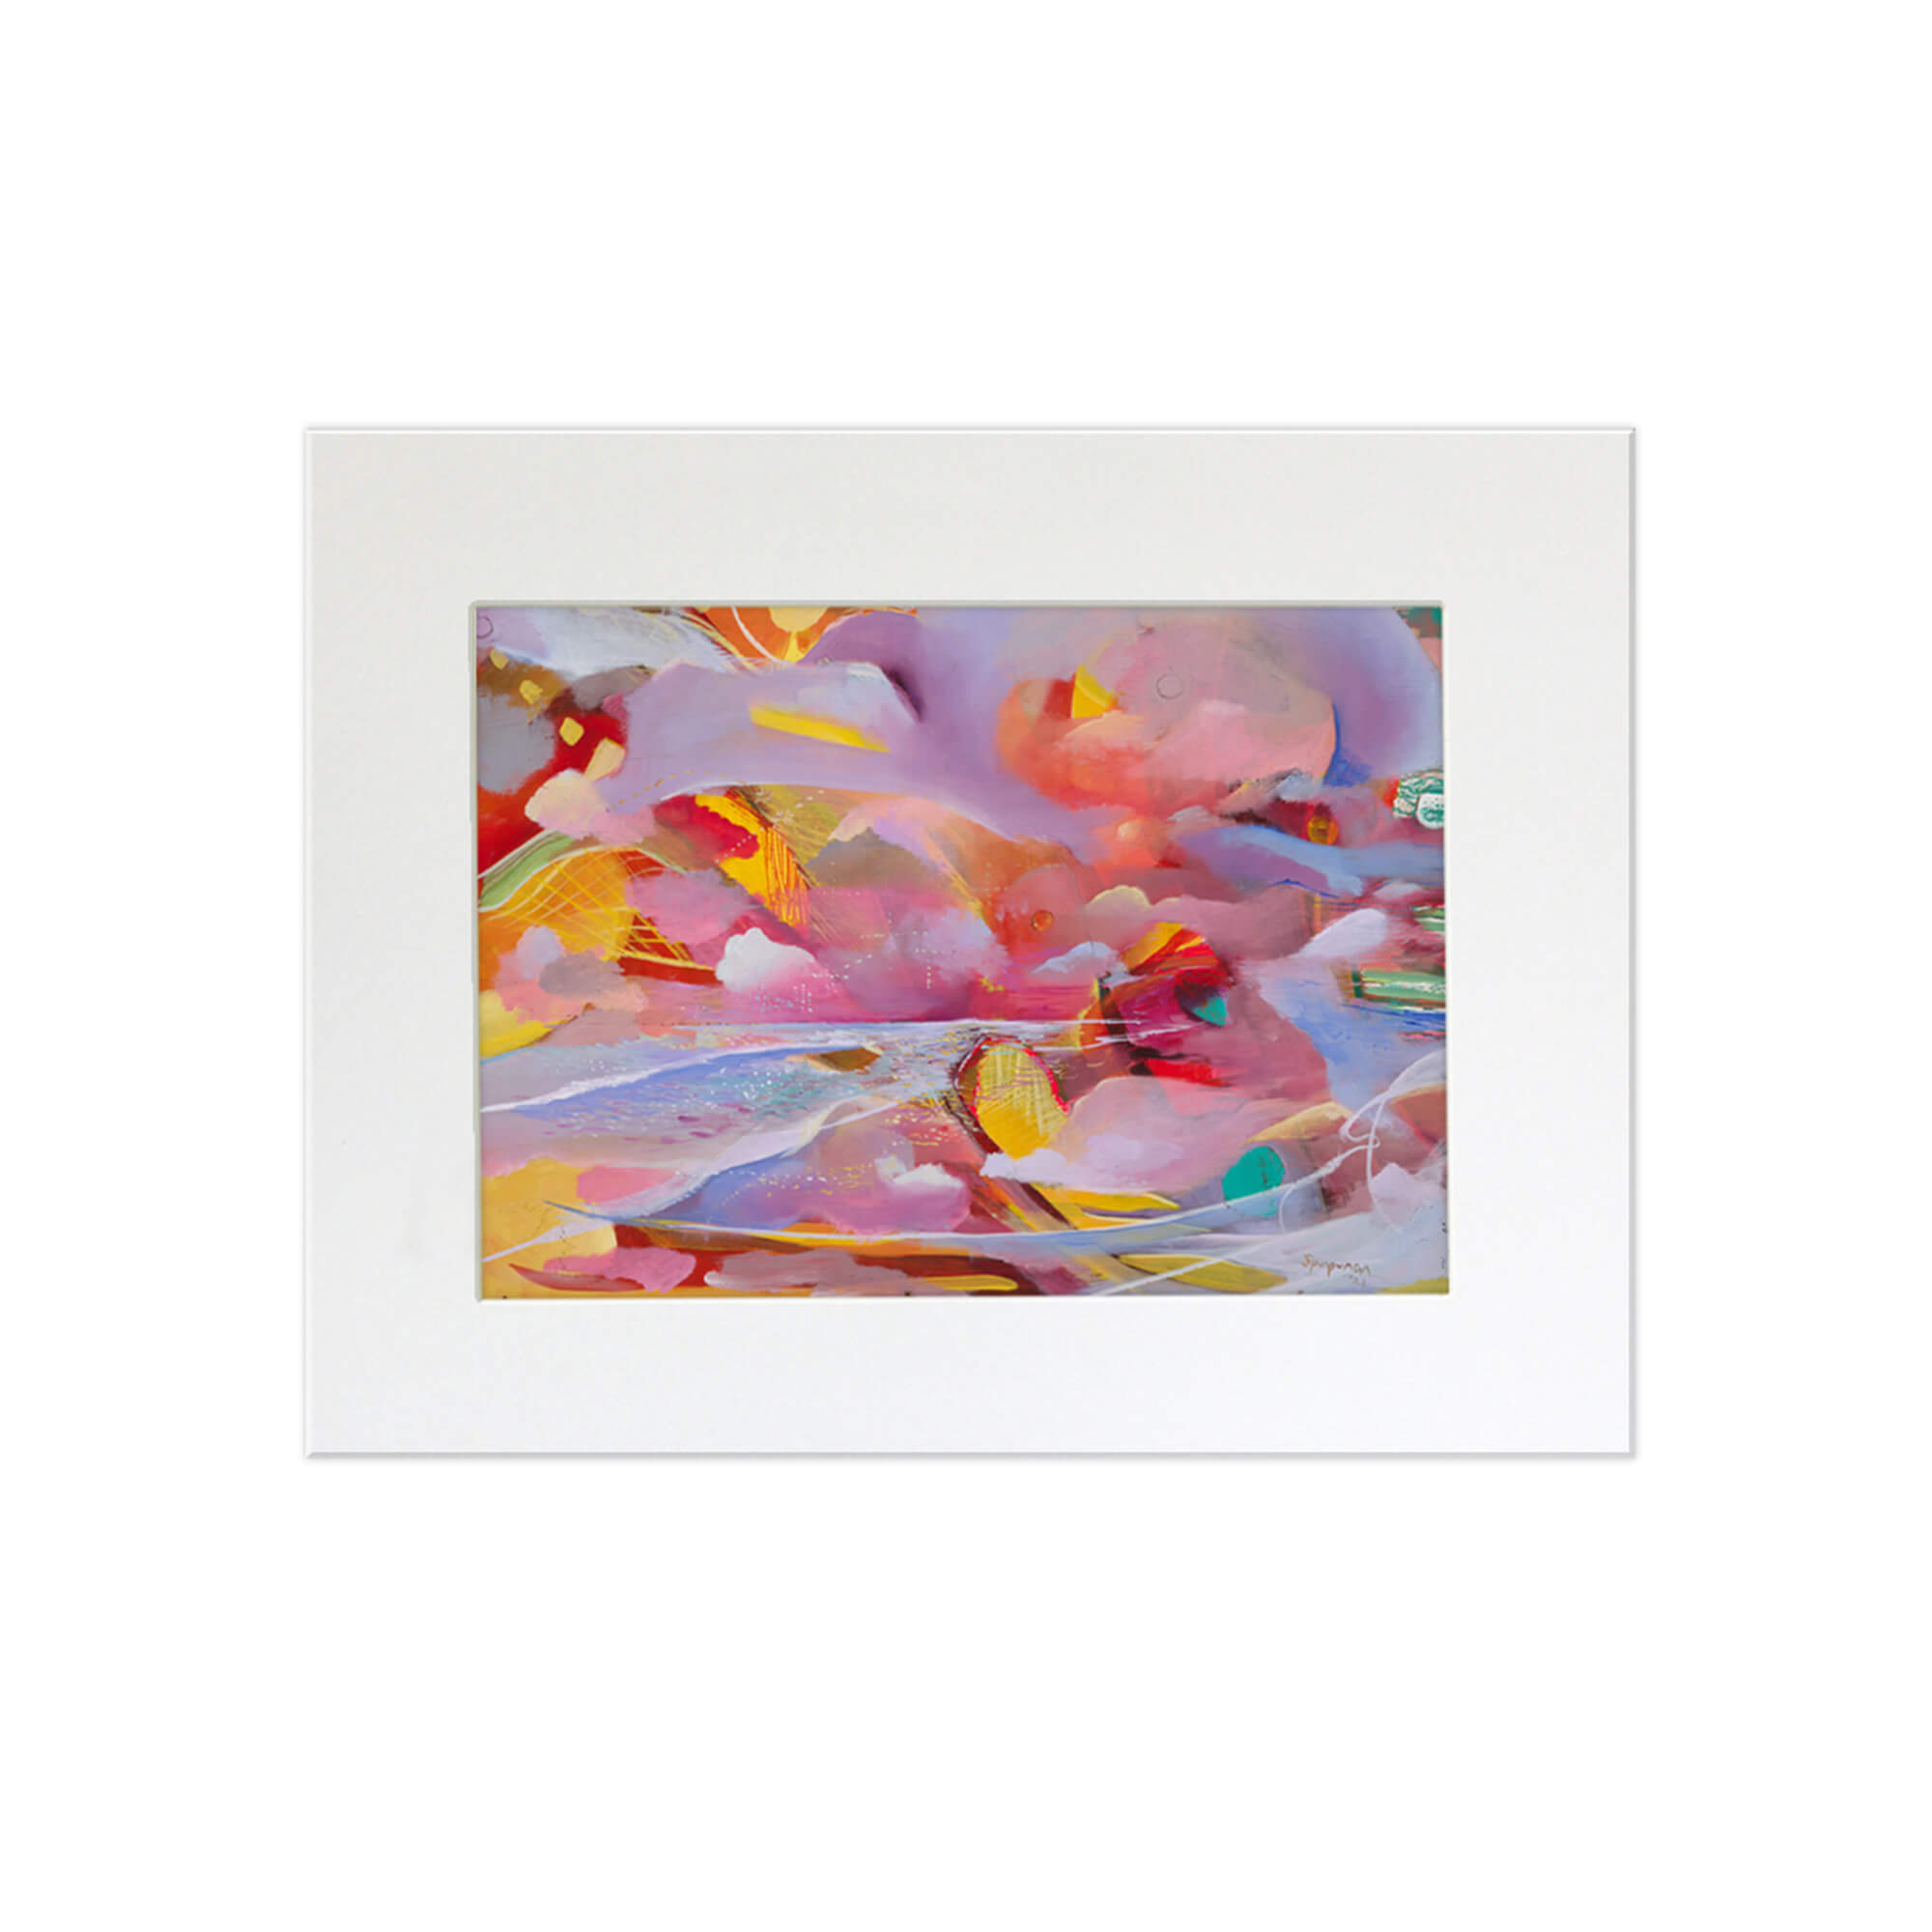 A matted art print of a vibrant artwork that features the beach horizon with cotton candy colors by Hawaii artist Saumolia Puapuaga